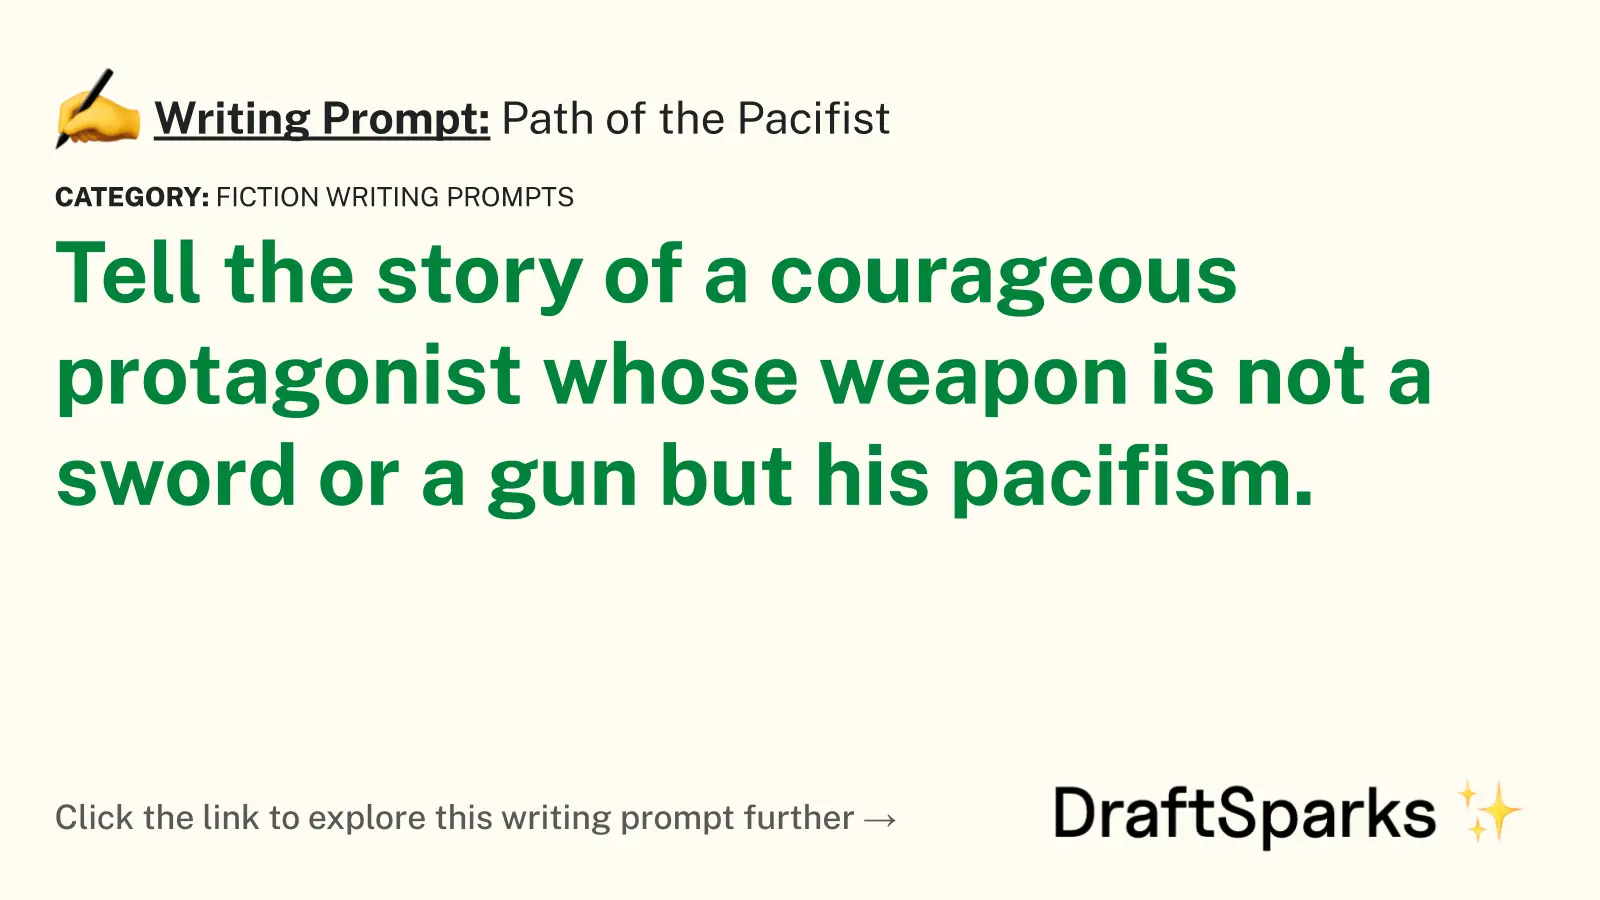 Path of the Pacifist